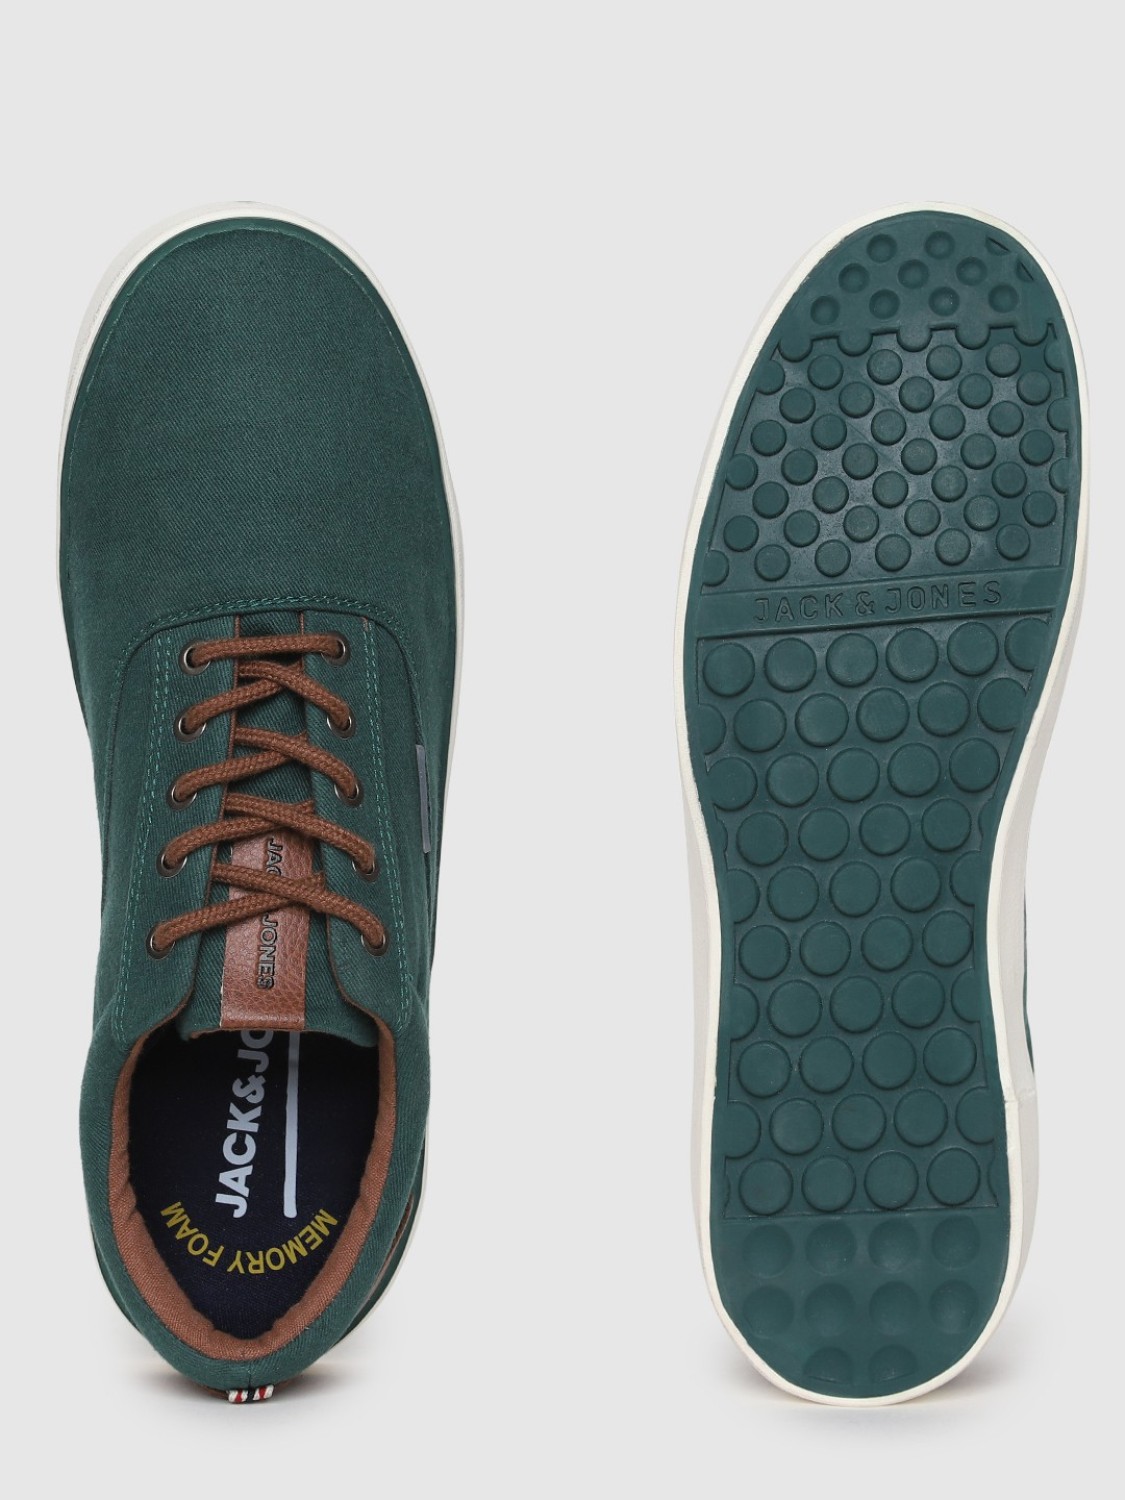 JACK & JONES JFW VISIONNEW CANPU MIX FOREST NIGHT Canvas Shoes For Men  (Green, Brown) - Price History